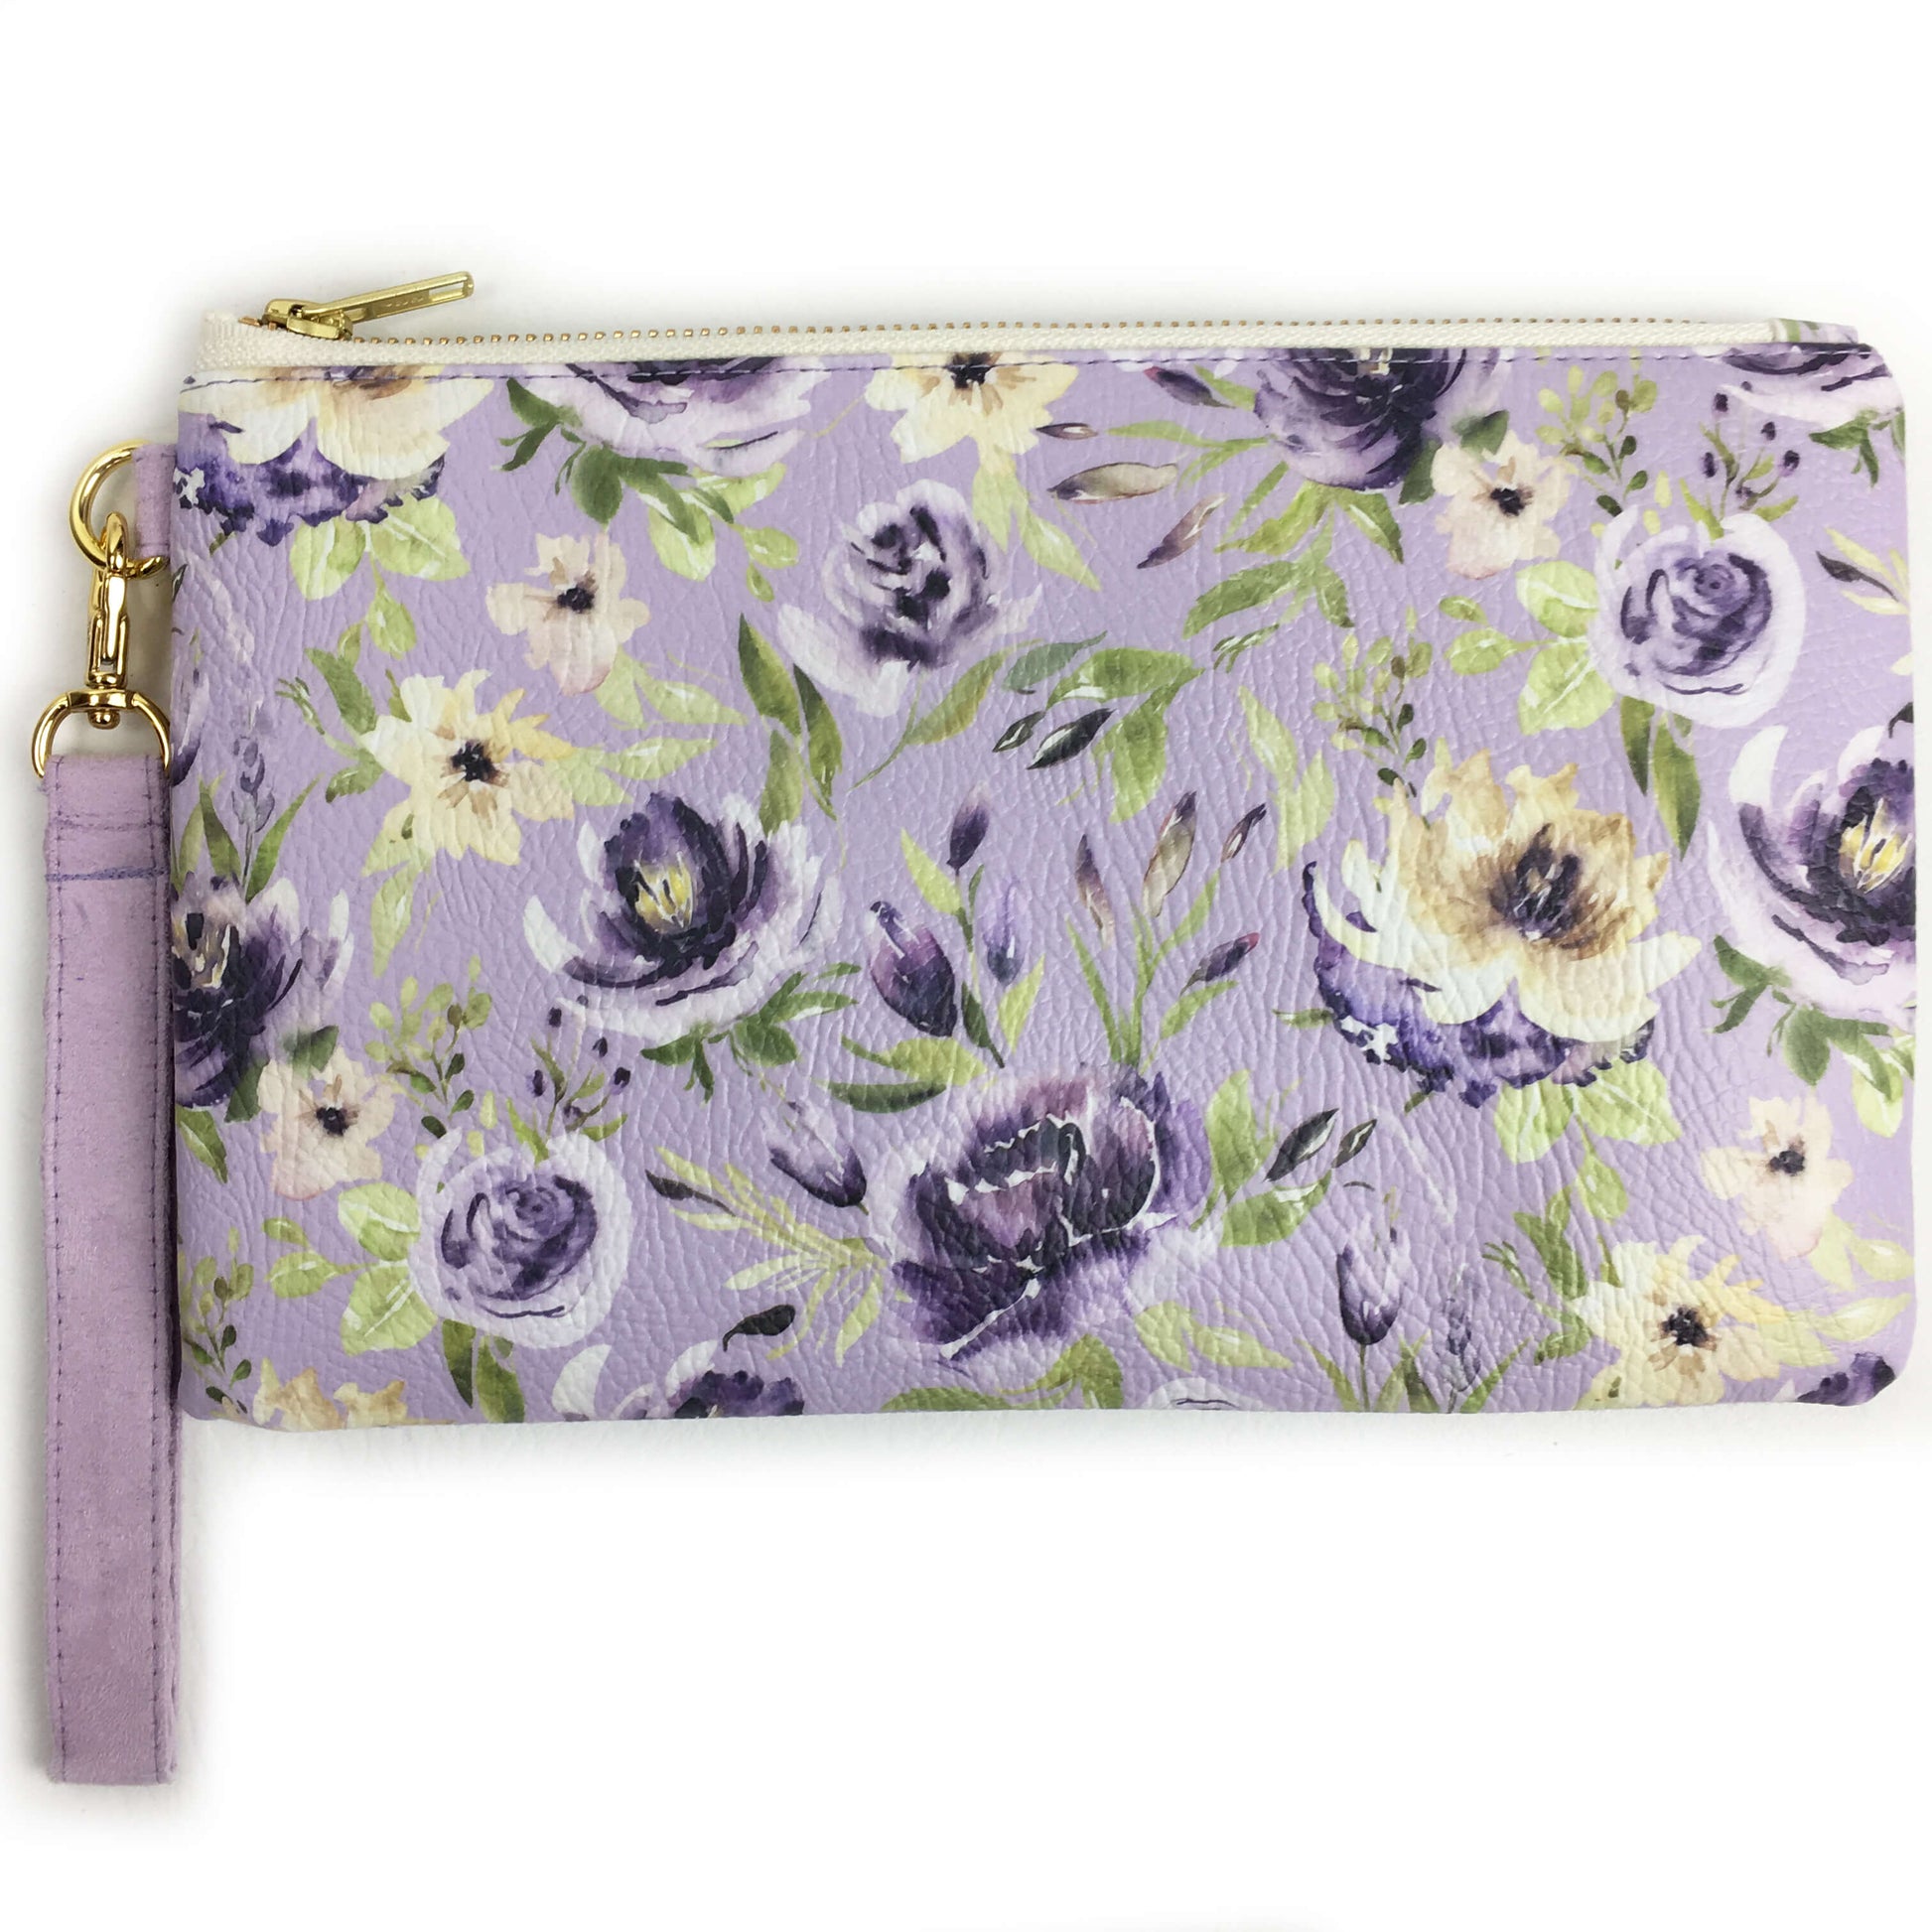 Watercolor mixed floral on lavender wristlet - vegan leather/suede - UndertheLeafDesigns.com